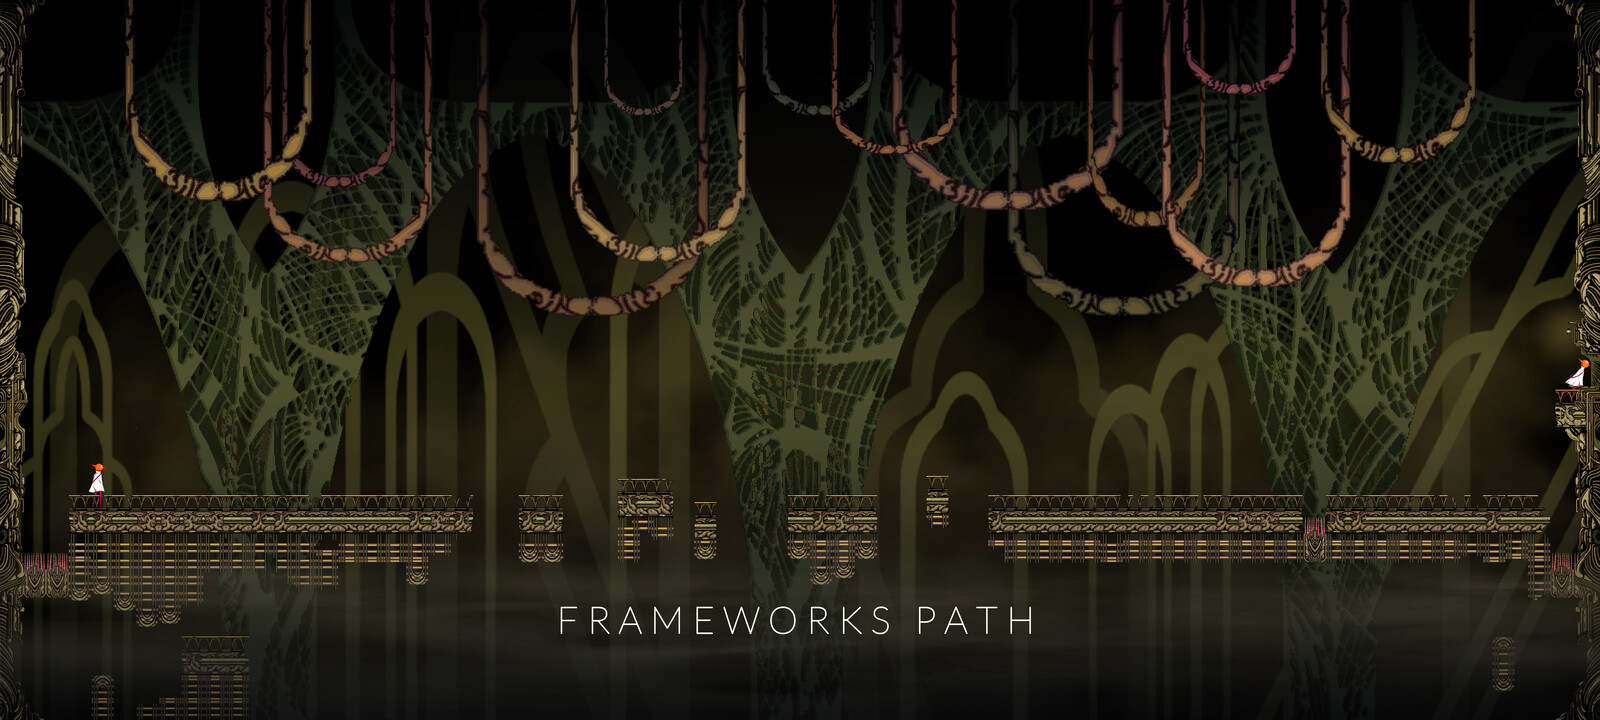 FRAMEWORKS PATH - Personal project